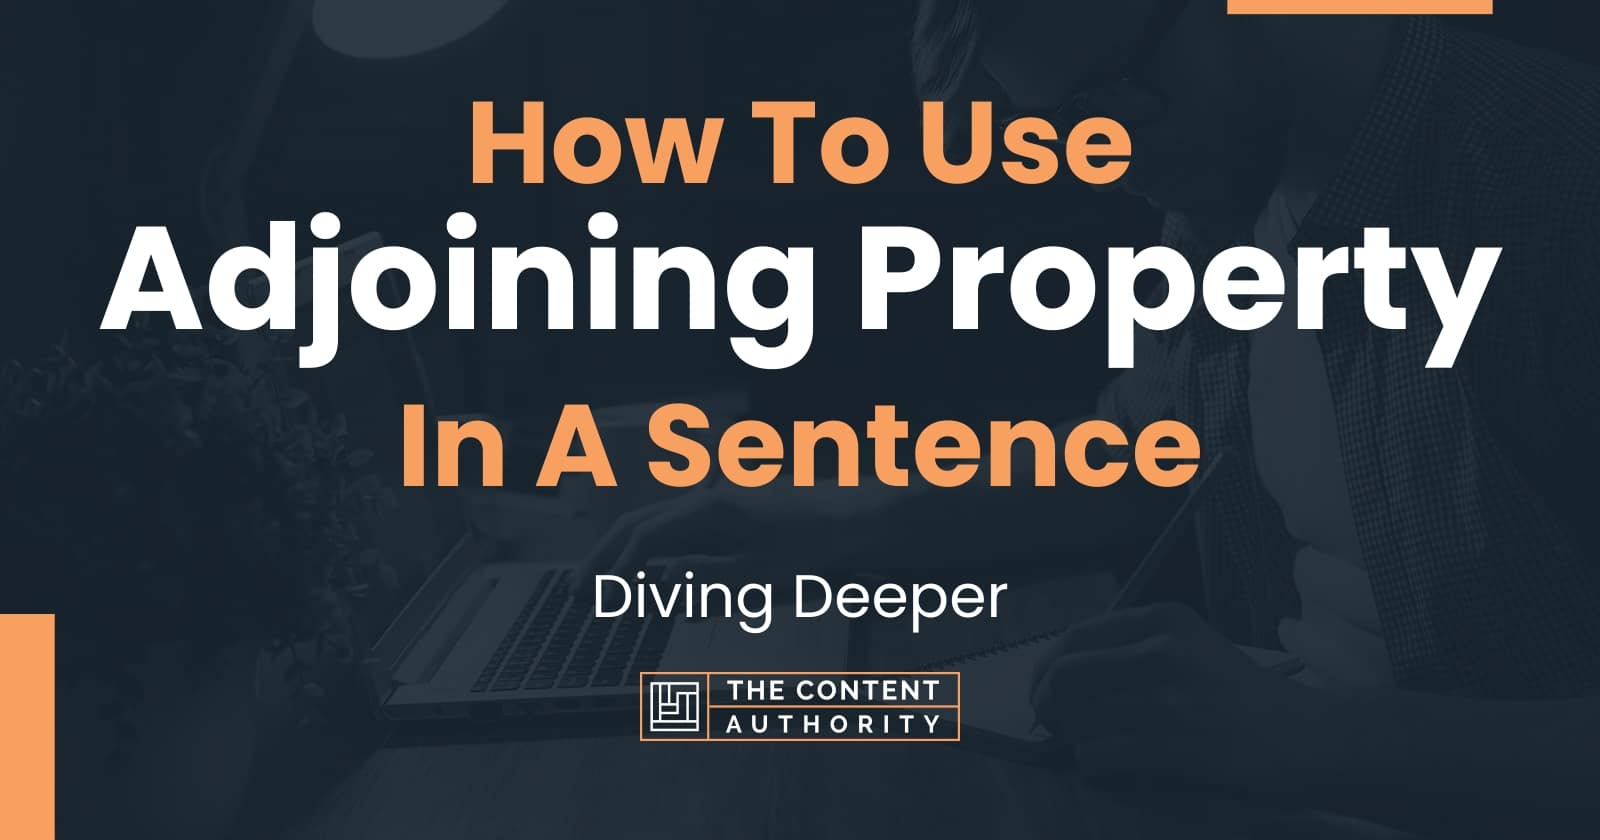 how-to-use-adjoining-property-in-a-sentence-diving-deeper